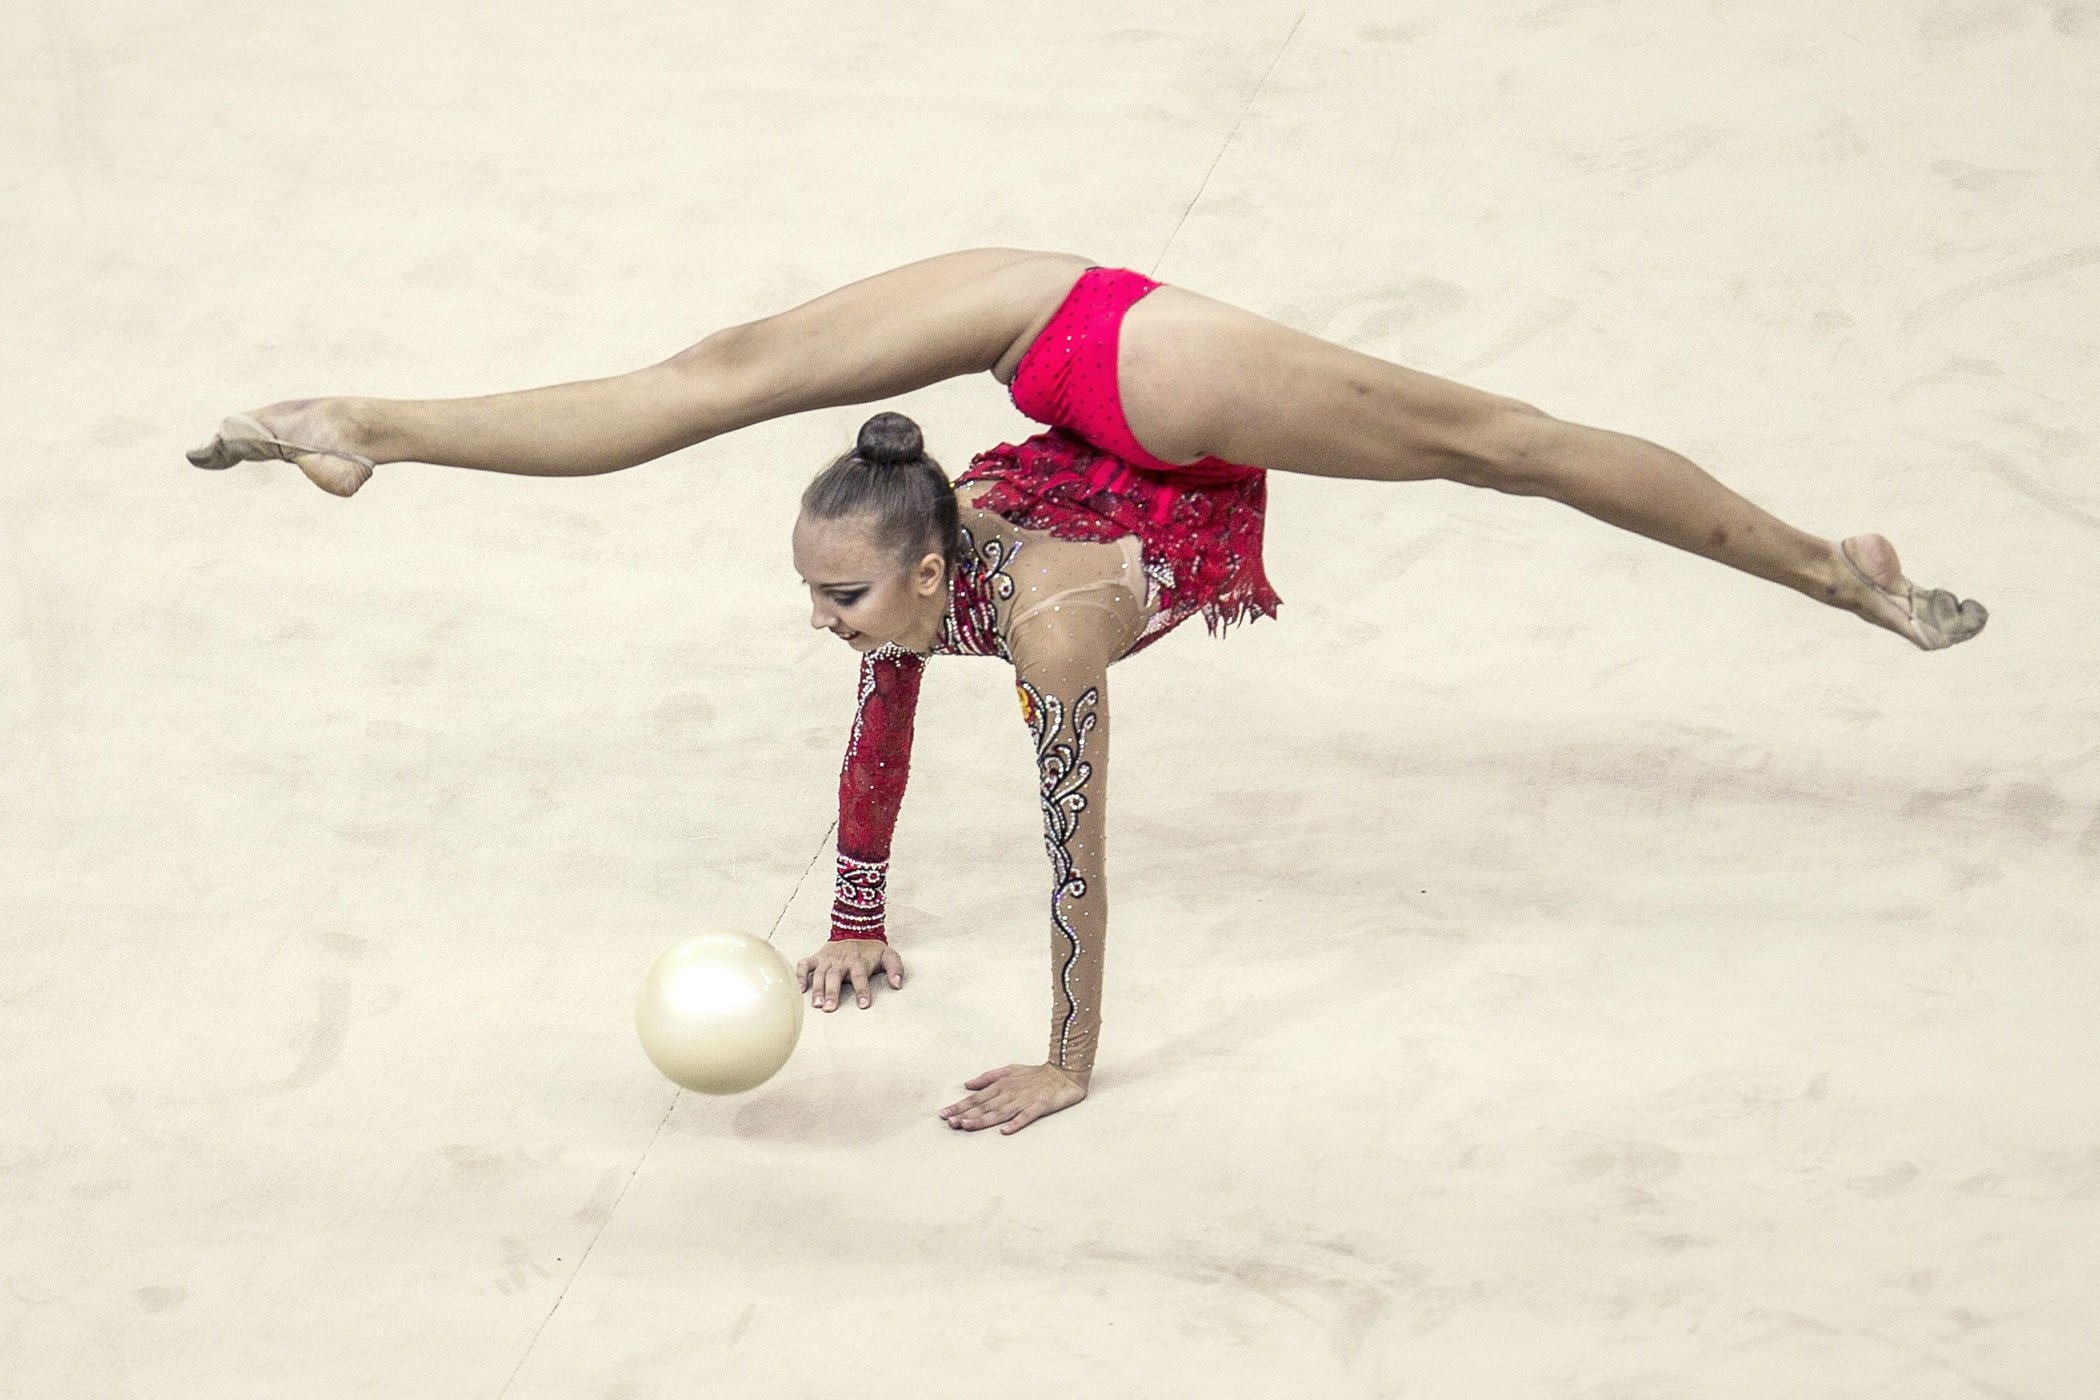 Floor (Gymnastics): An artistic exercise with a special ball, Sports choreography performed by a female gymnast. 2100x1400 HD Background.